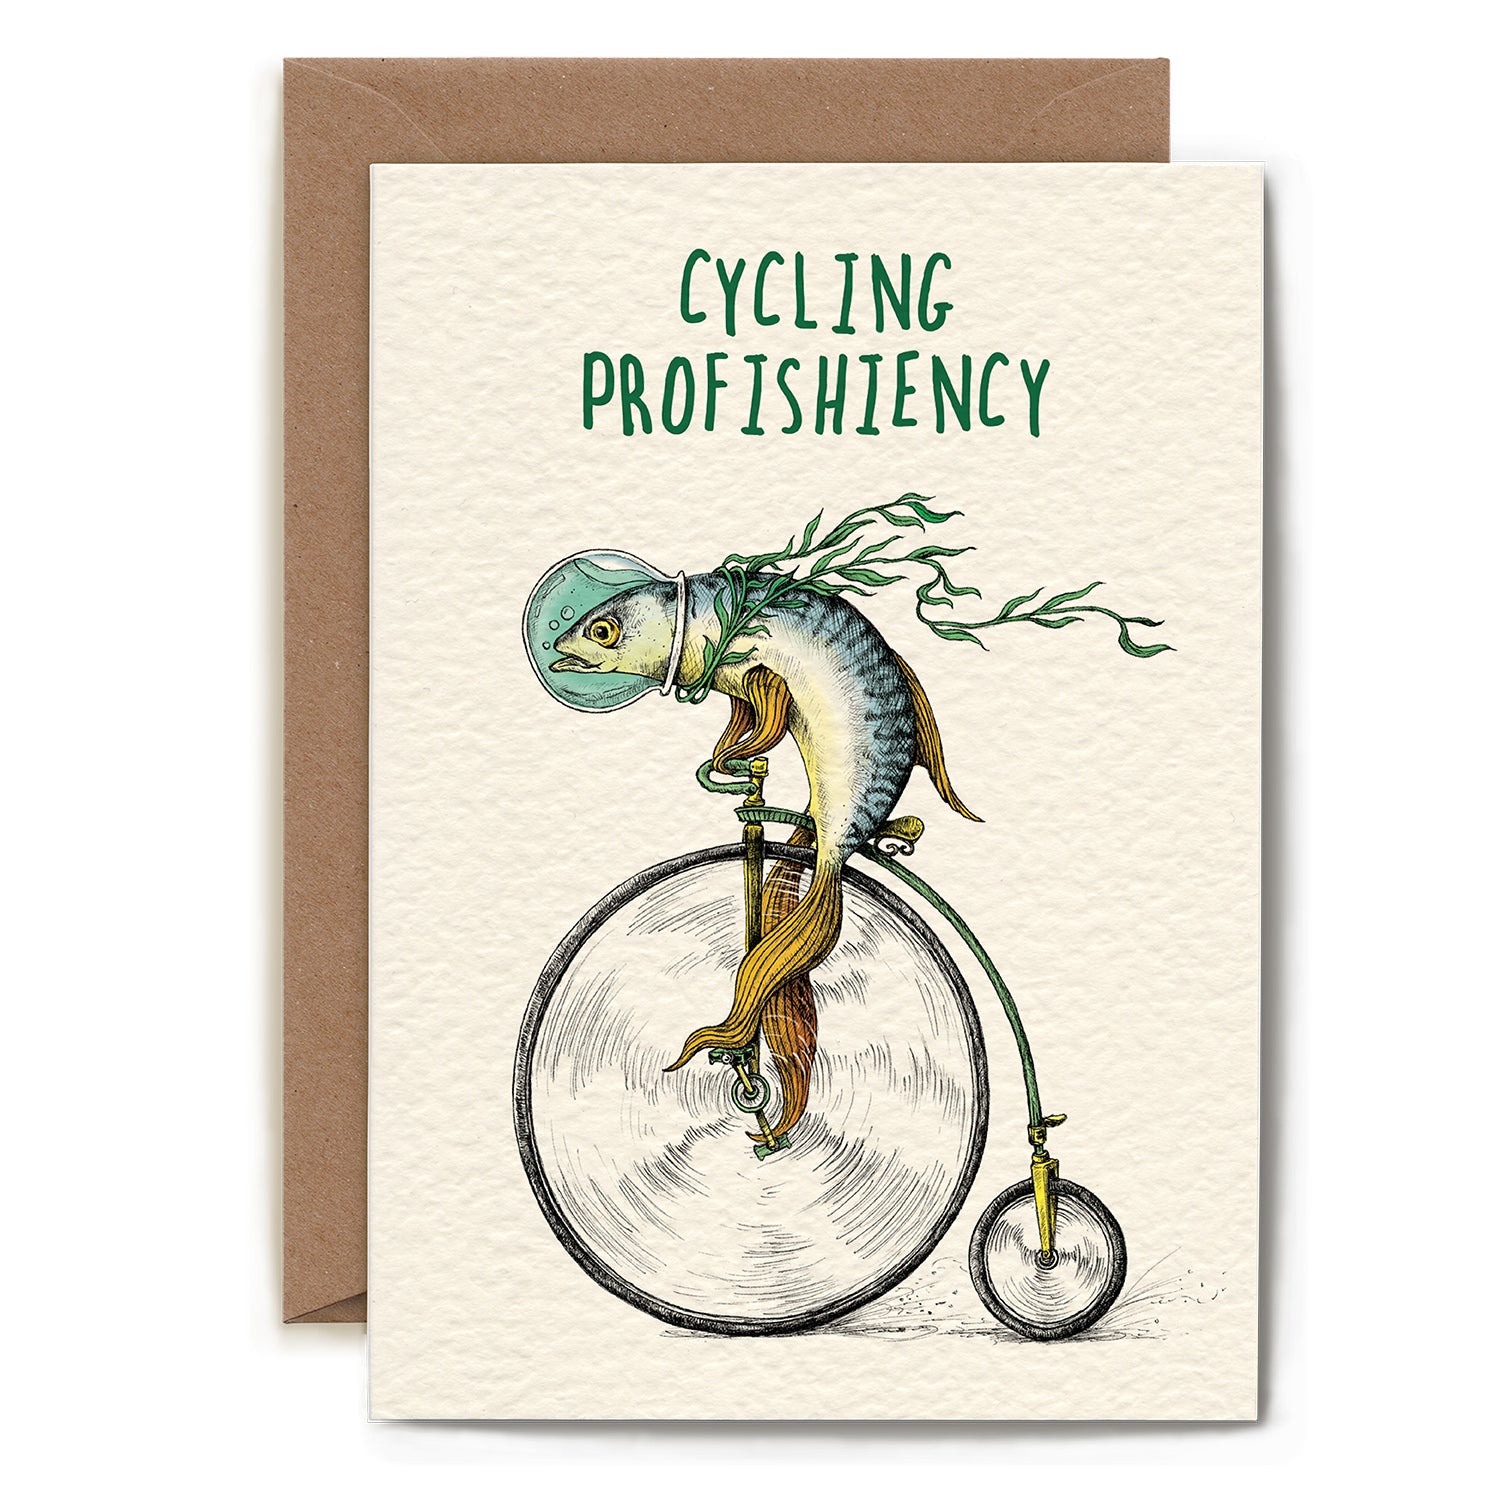 An illustrated blank Cycling Profishiency Card from Hester &amp; Cook stationery, a UK based company, featuring a whimsical depiction of a fish riding an old-fashioned penny-farthing bicycle with the caption &quot;C